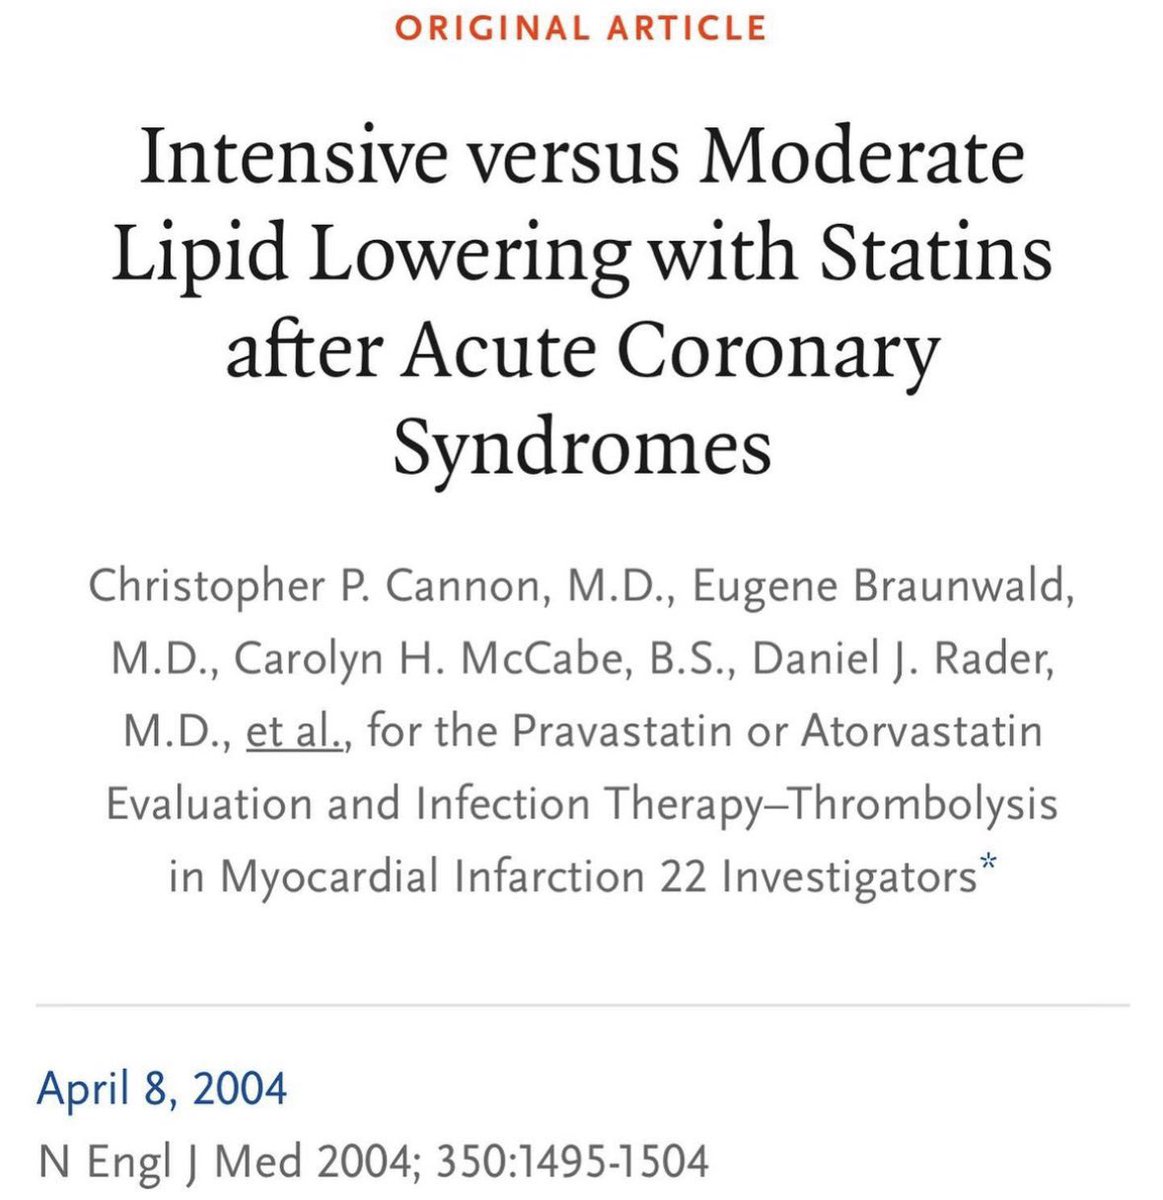 High intensity statin after ACS? A standard of care prior to hospital discharge REGARDLESS of cholesterol levels, due in large part to this trial. 

High intensity statins:
1️⃣ Atorvastatin 40 or 80 mg daily
2️⃣ Rosuvastatin 20 or 40 mg daily

PROVE-IT TIMI 22 Trial, NEJM 2004 ♥️